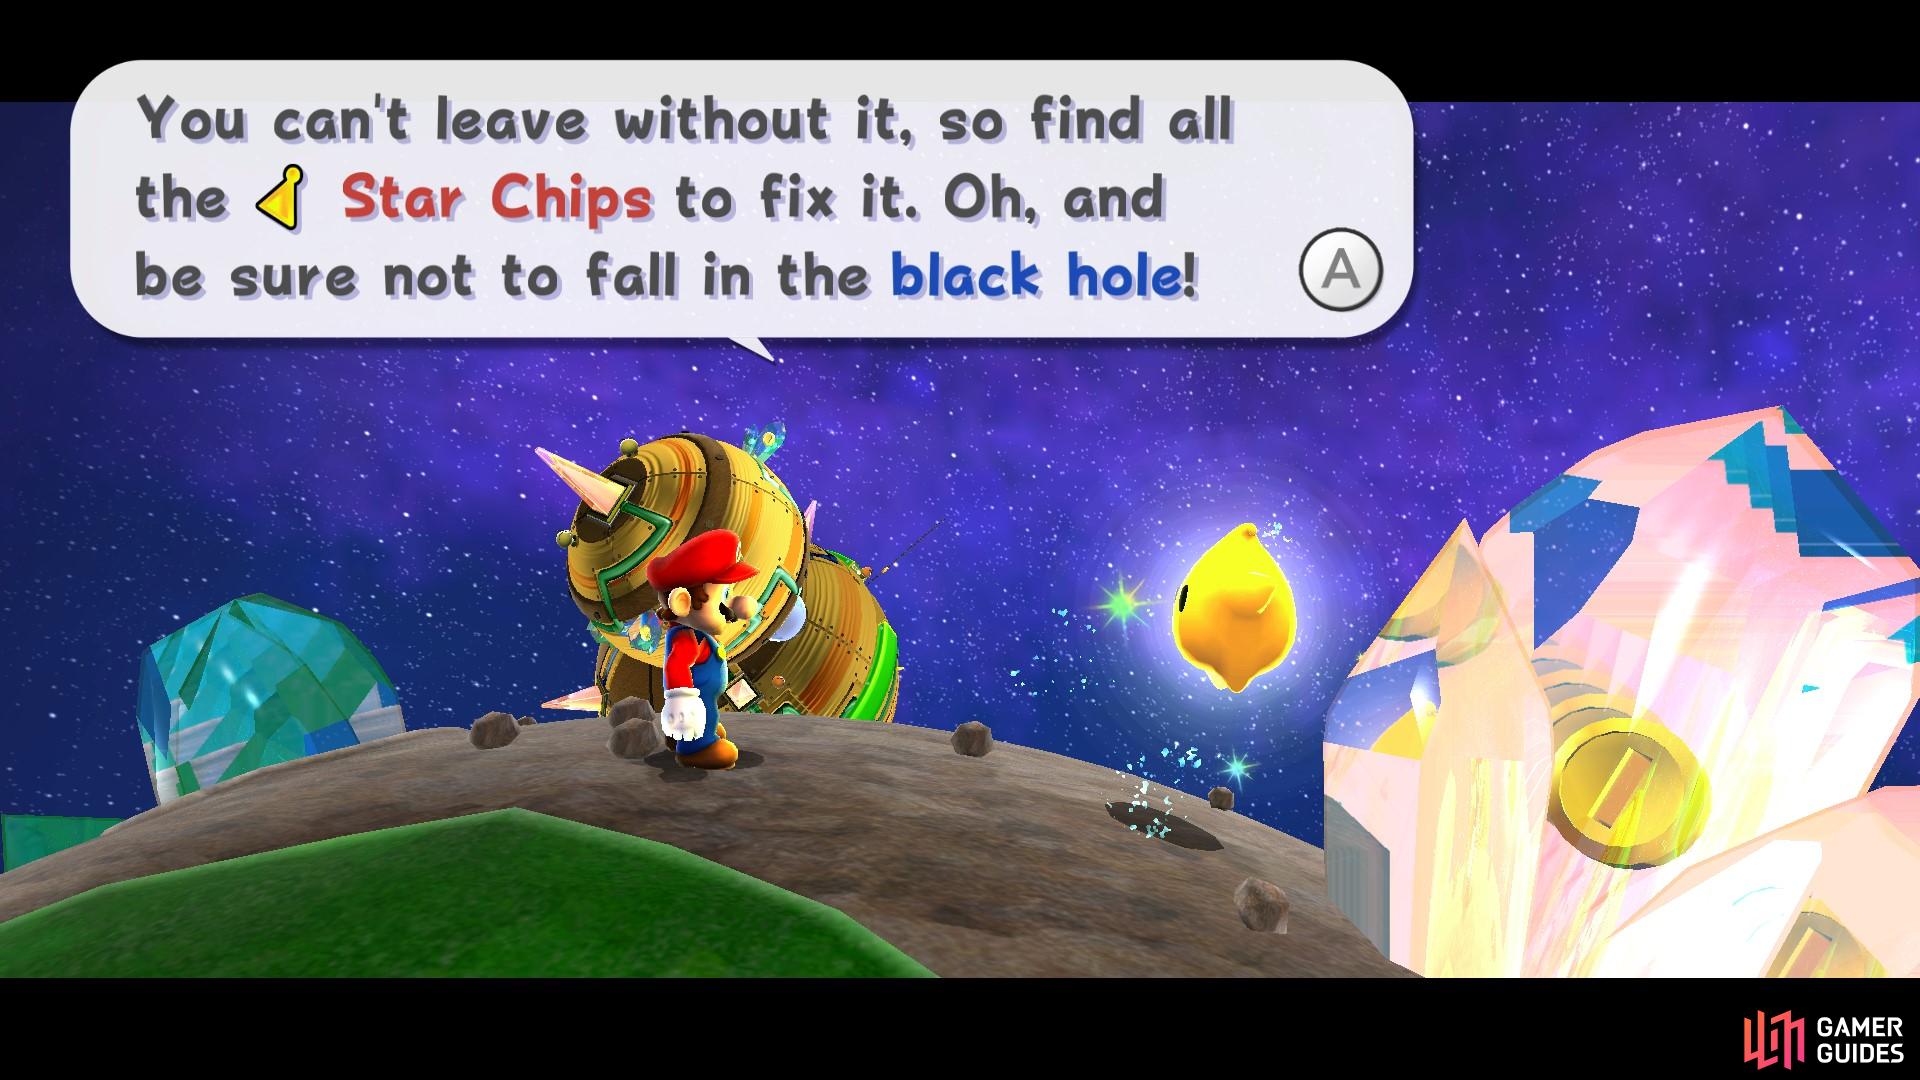 You'll need to collect all the Star Chips to continue.